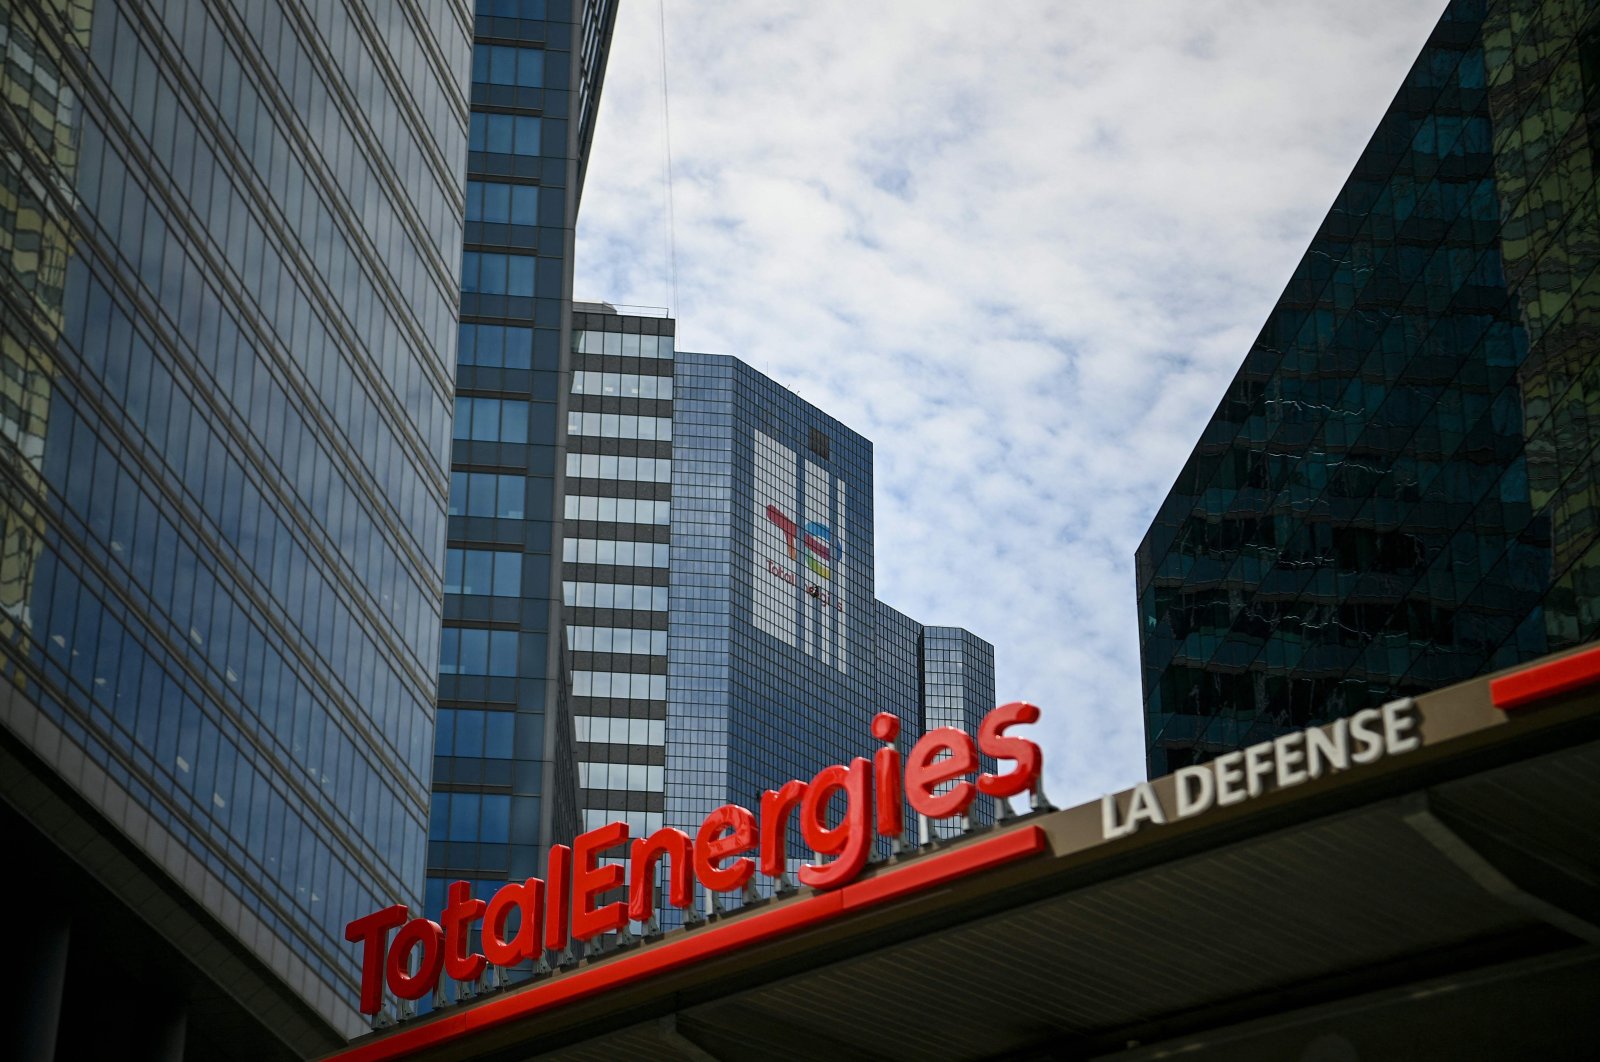 The TotalEnergies logo is seen during its unveling ceremony, at a charging station in La Defense on the outskirts of Paris, France, May 28, 2021. (AFP Photo)